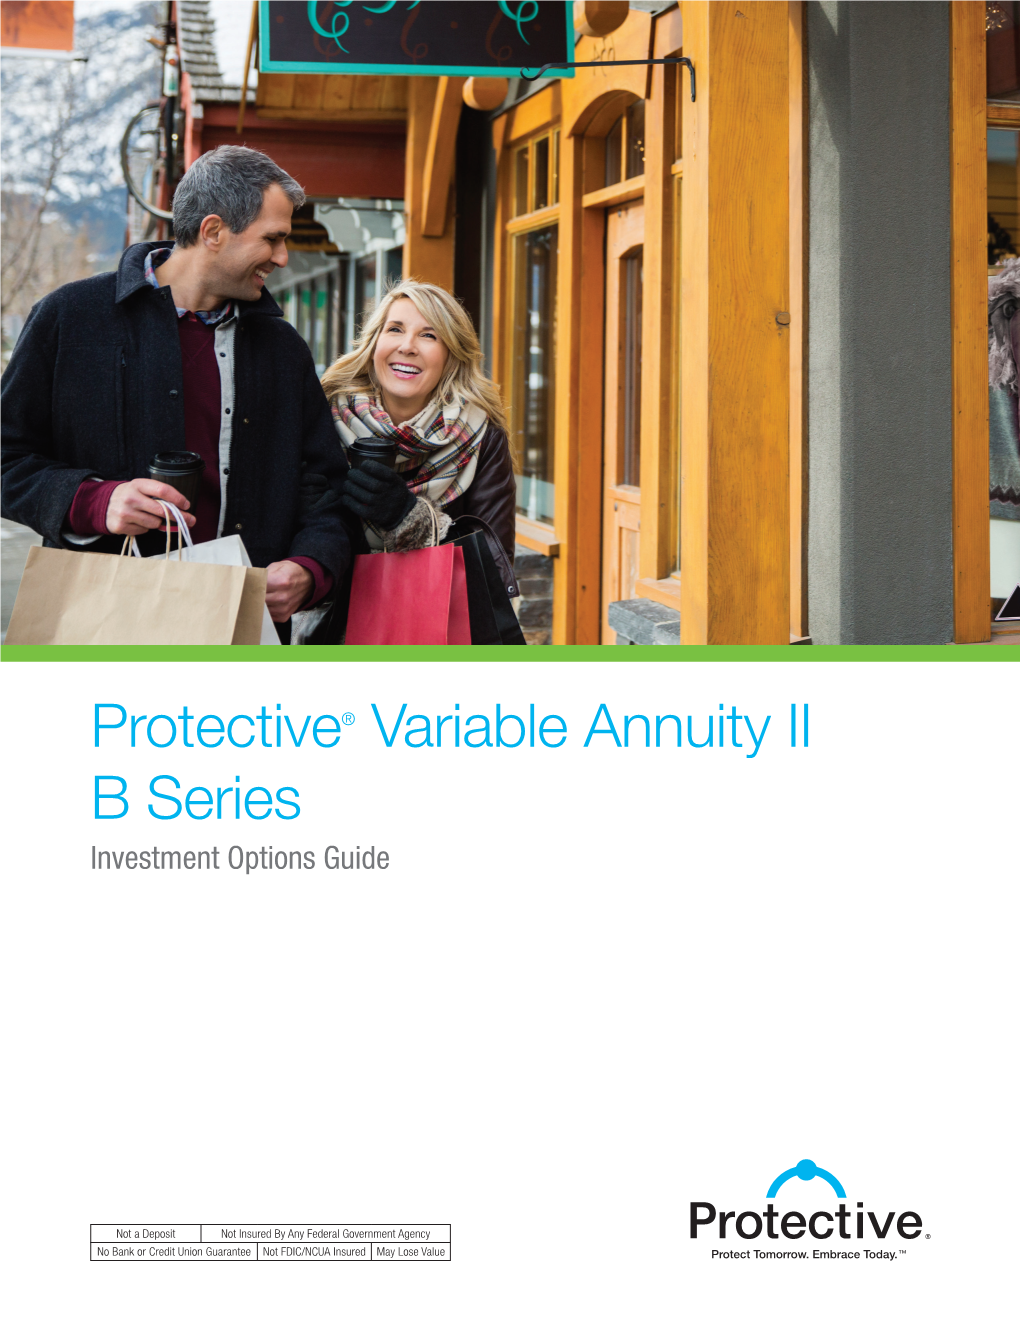 Protective® Variable Annuity II B Series Investment Options Guide